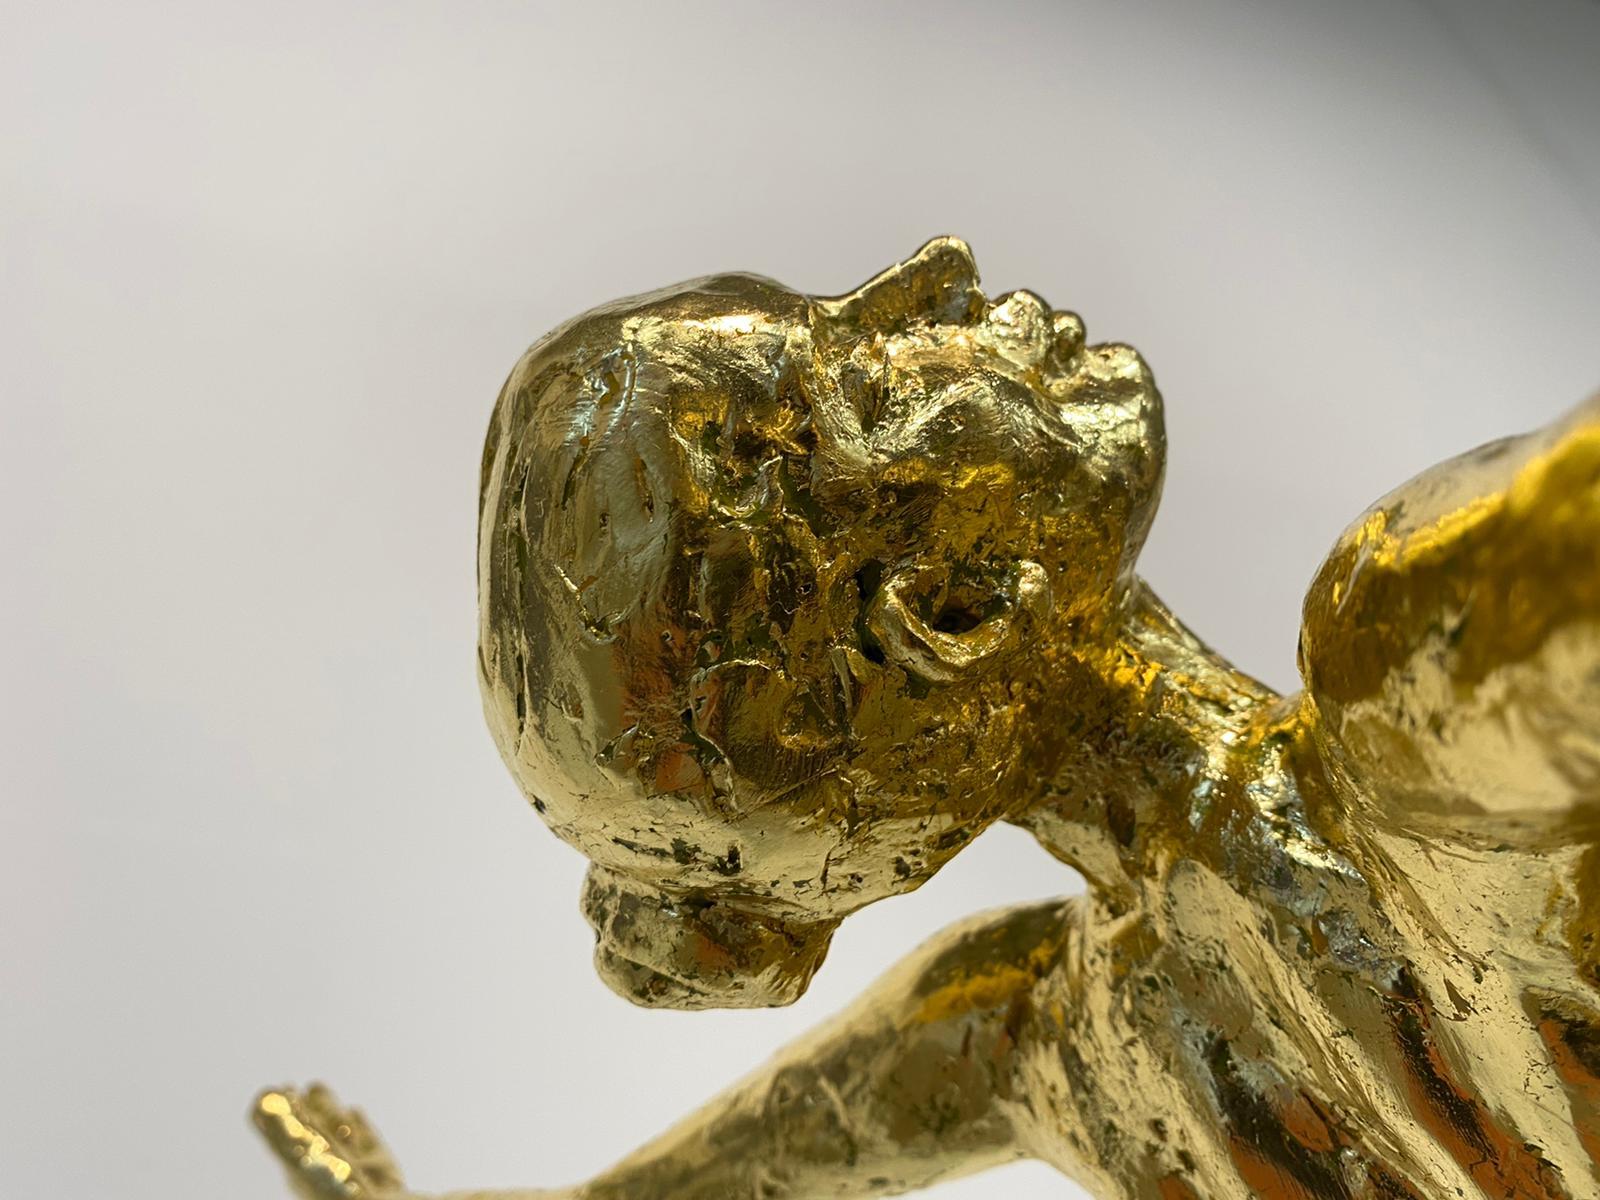 Living Daylight Gold- 21st Century Sculpture of a nude woman  8